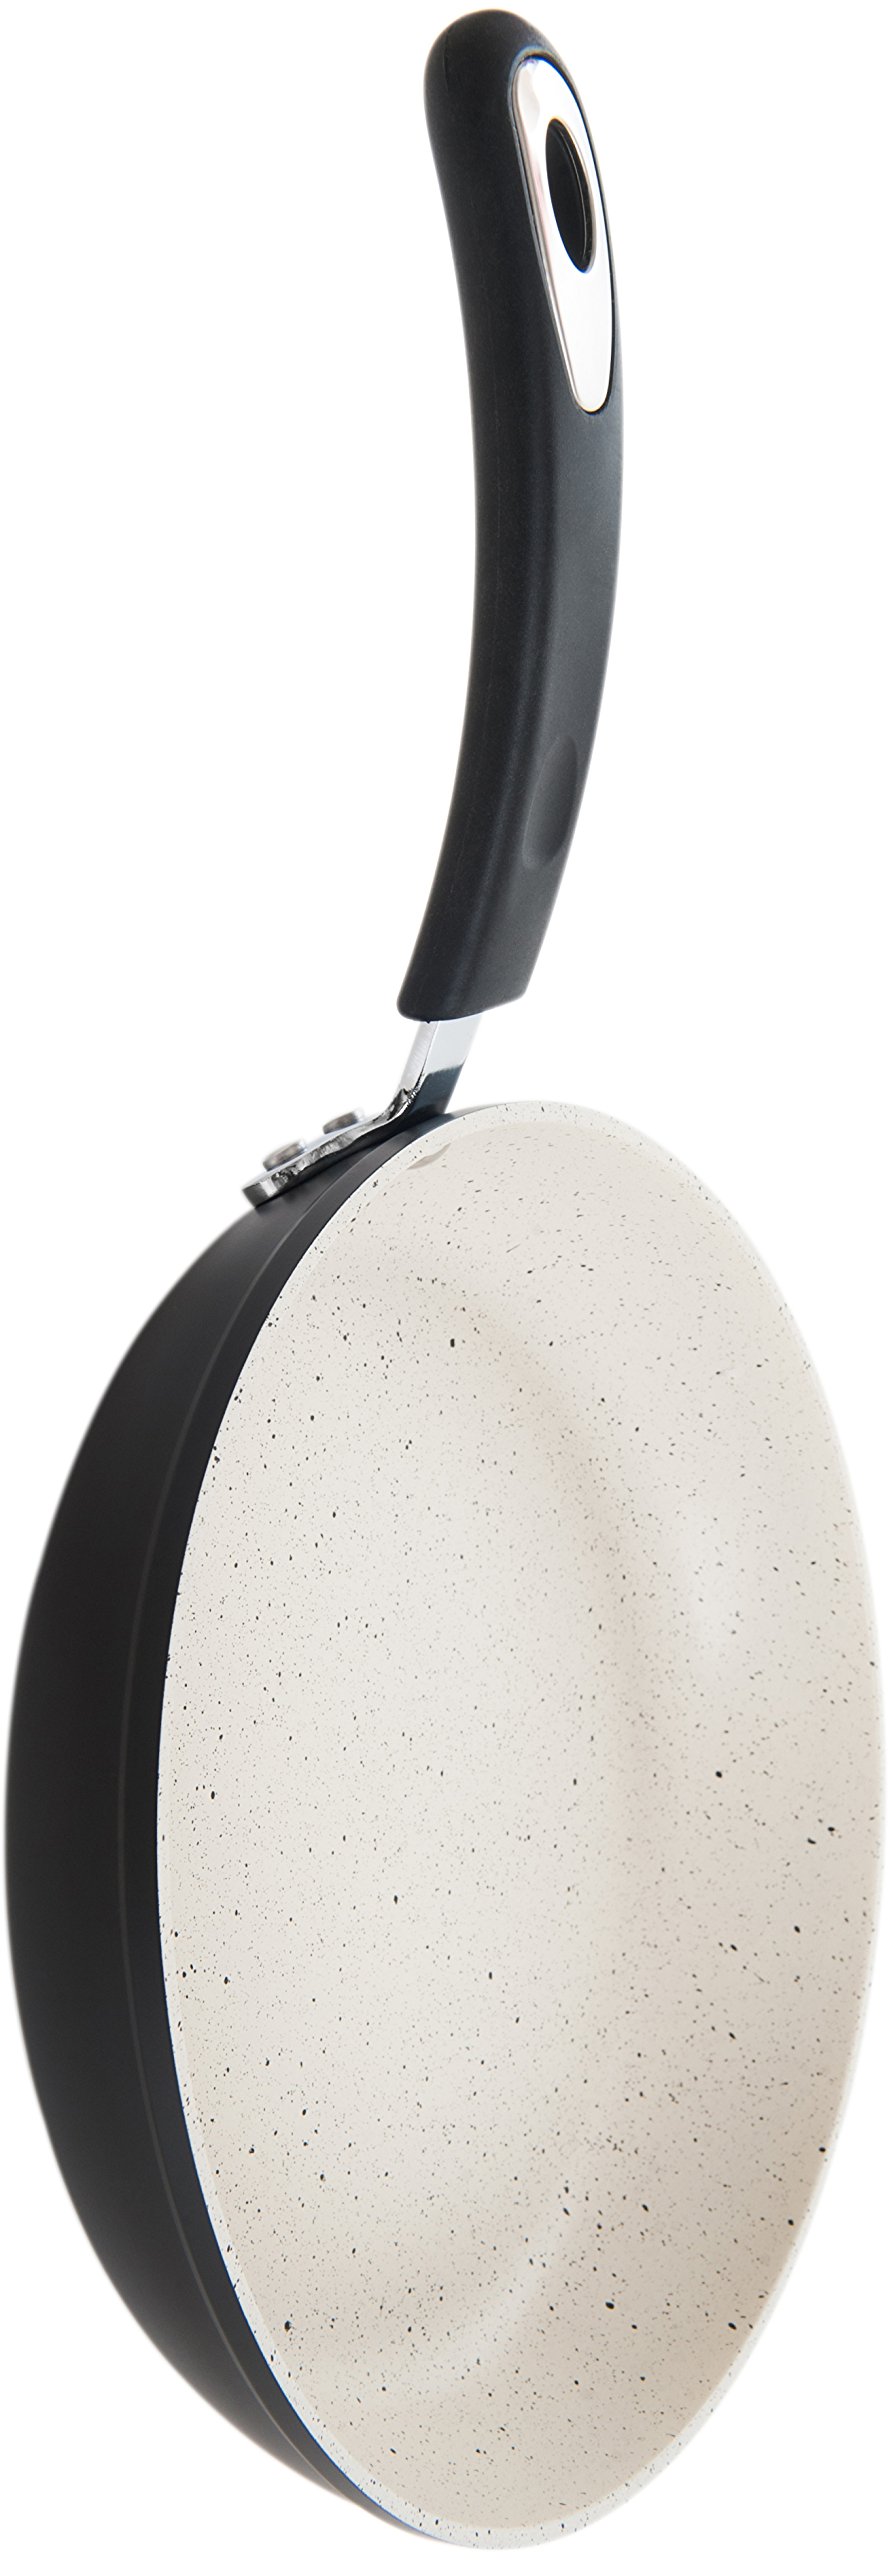 Ozeri 10" Stone Frying Pan by Ozeri, with 100% APEO & PFOA-Free Stone-Derived Non-Stick Coating from Germany